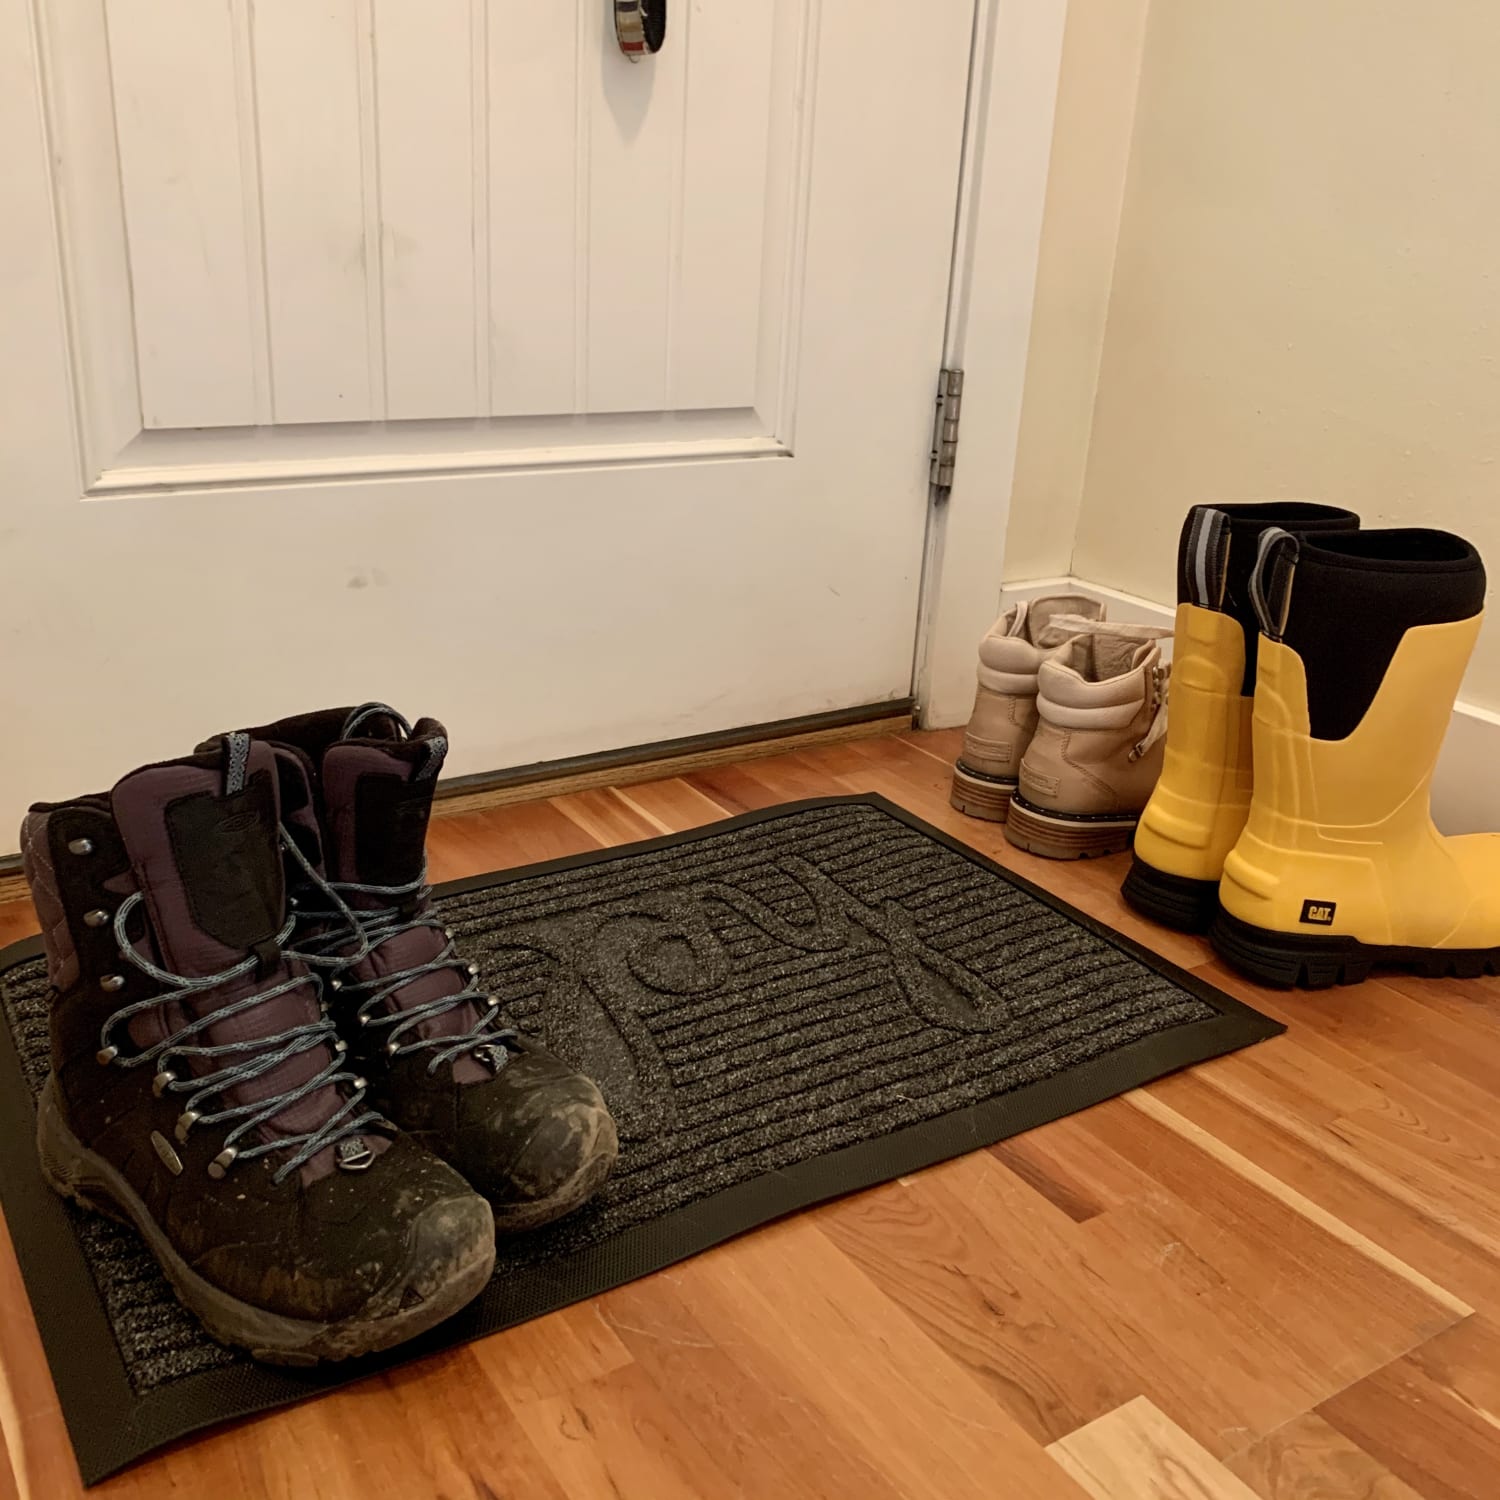 This doormat with 17,000 reviews traps dirt and snow so my floors